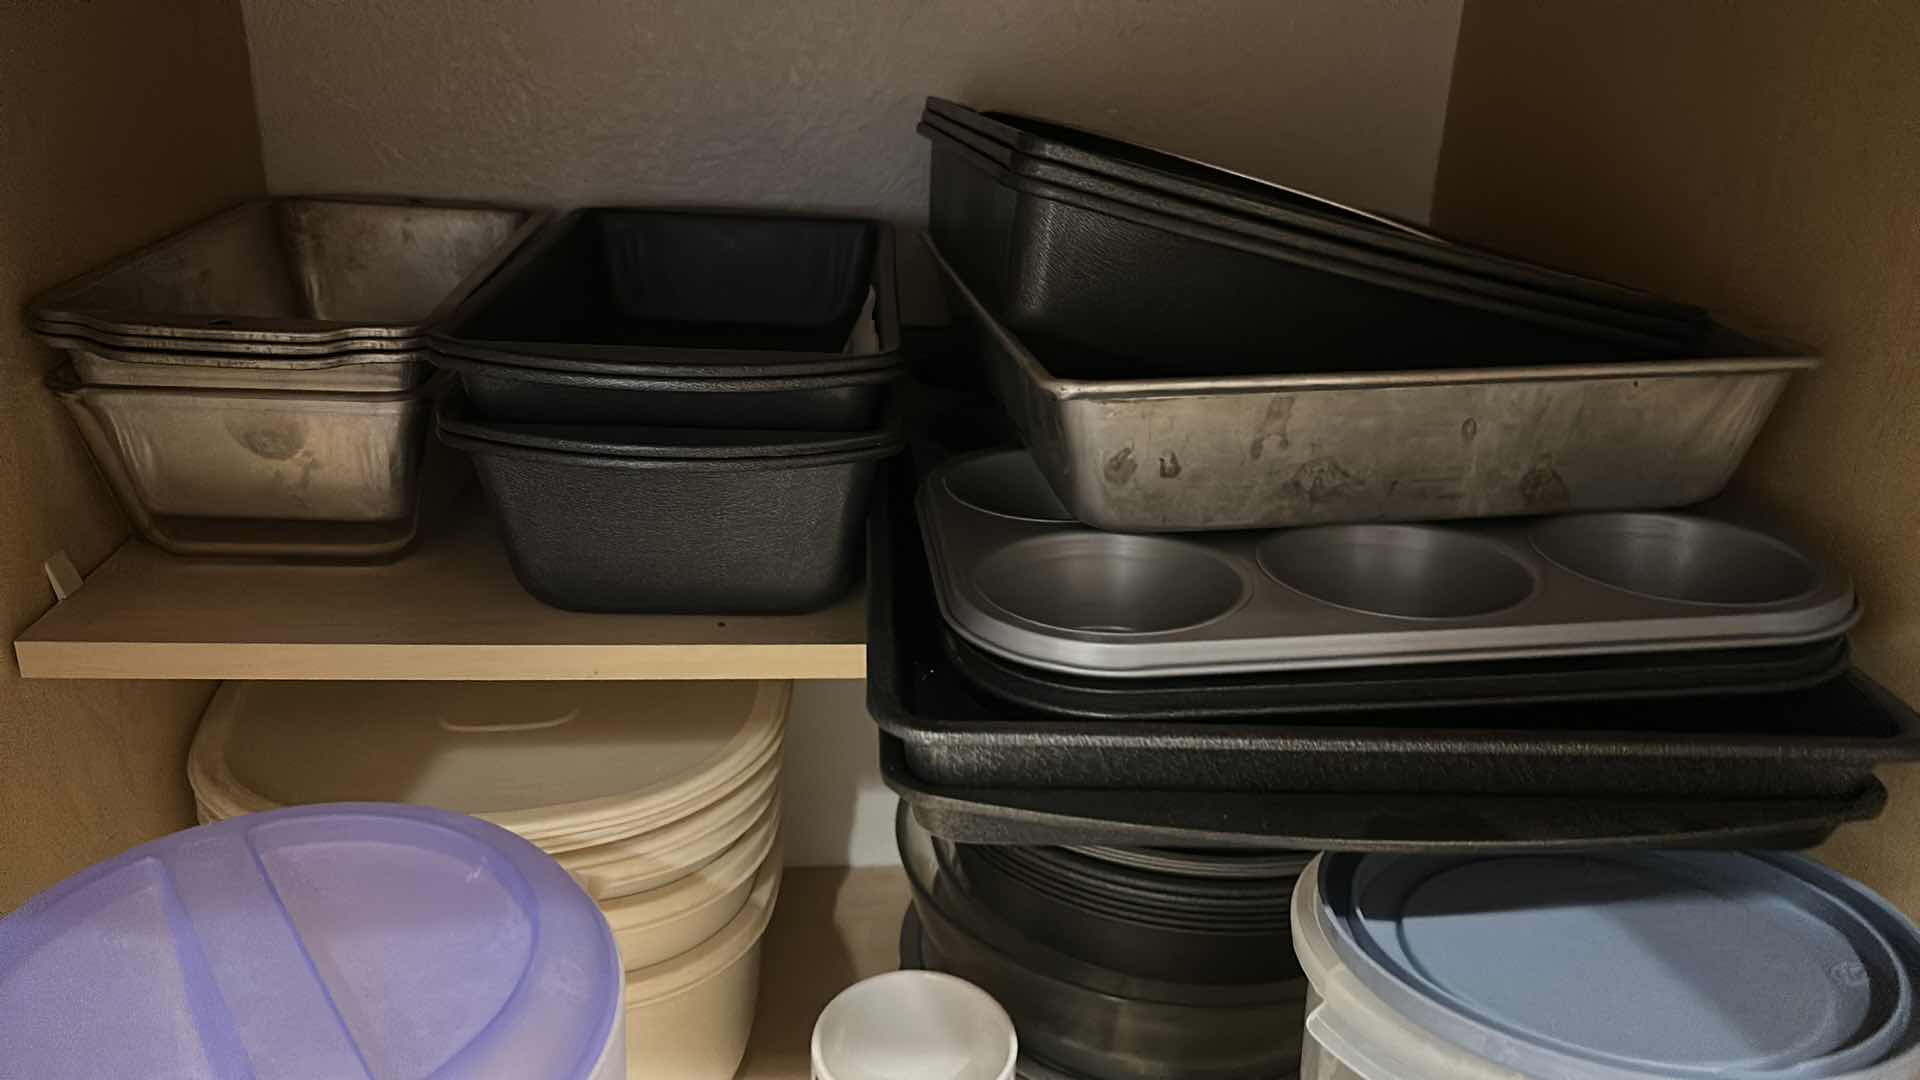 Photo 2 of CONTENTS OF CABINET NEXT TO FRIDGE IN KITCHEN - BAKING ITEMS, TUPPERWARE AND MORE